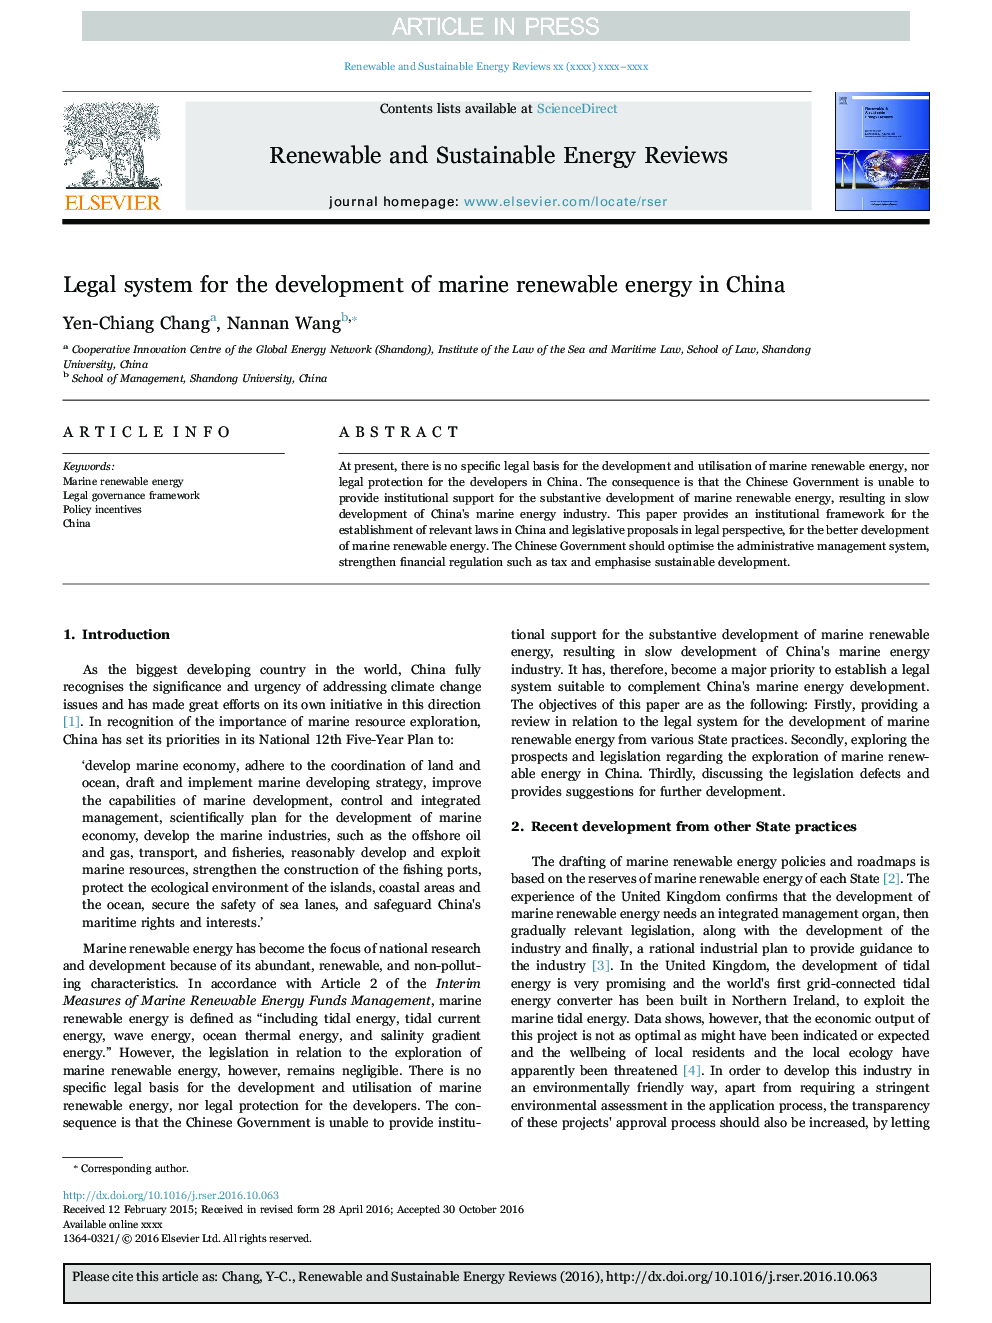 Legal system for the development of marine renewable energy in China